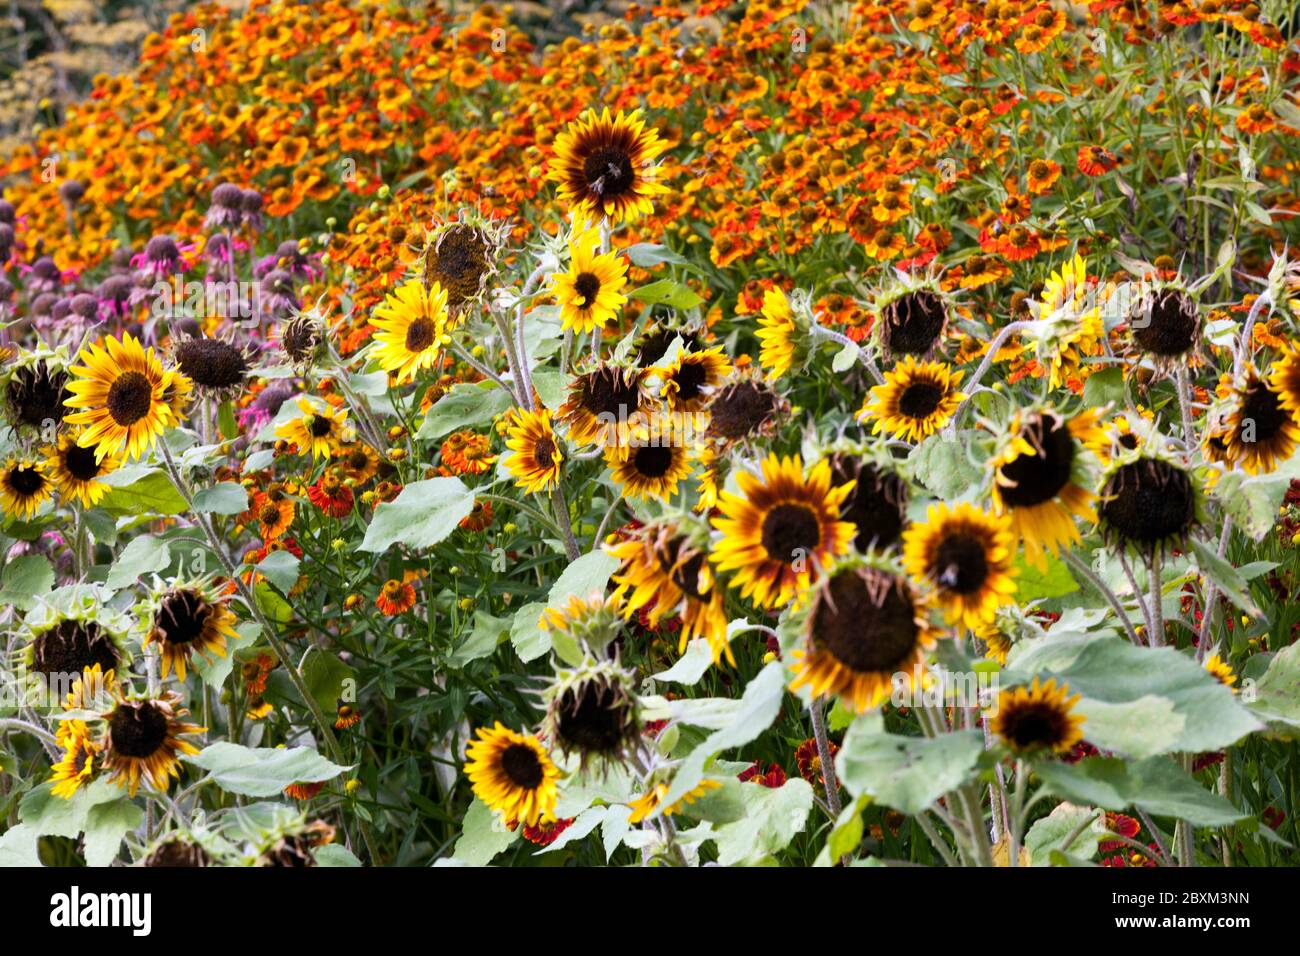 Sunflowers garden colorful group of flowers summer plants Sneezeweds sunflower mixed herbaceous border flowers garden Drifts plants colourful Cottage Stock Photo